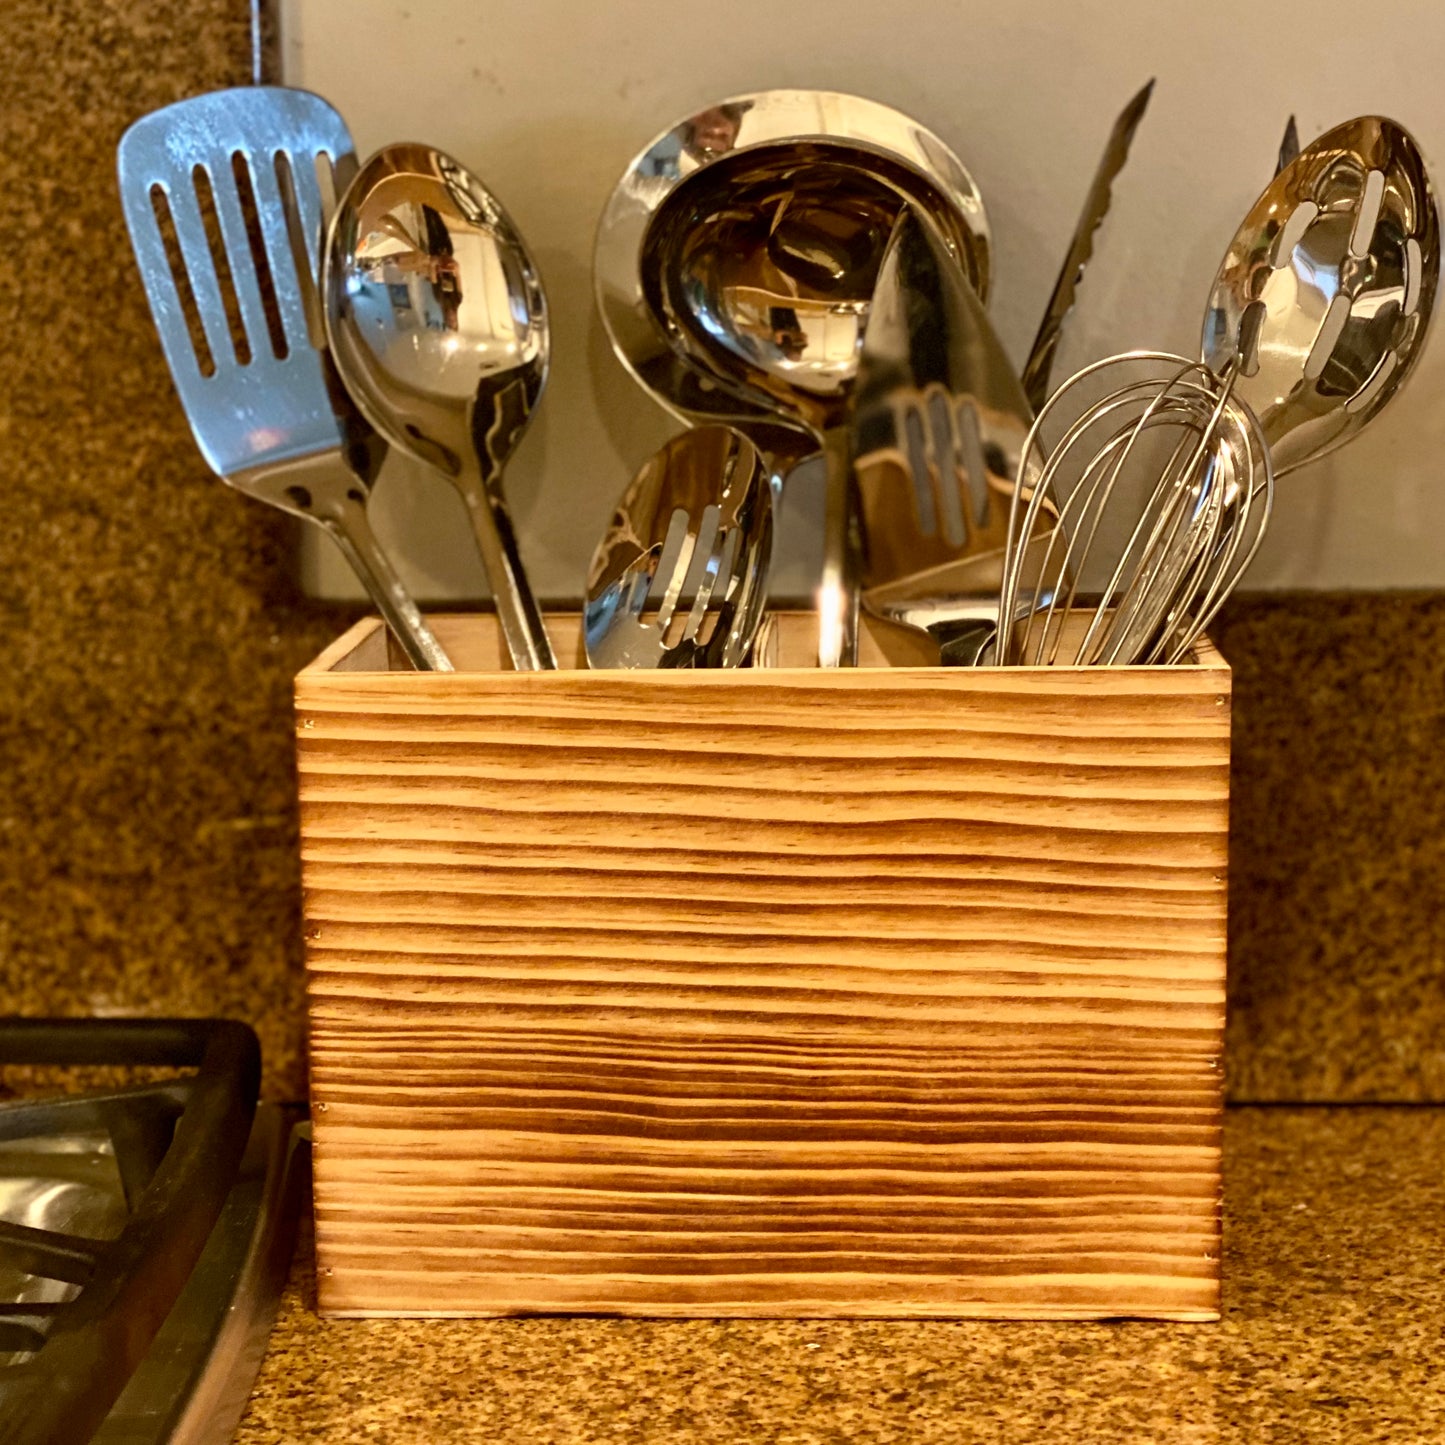 Utensil Holder in Rustic Wood for Kitchen Countertop and Cooking Tools